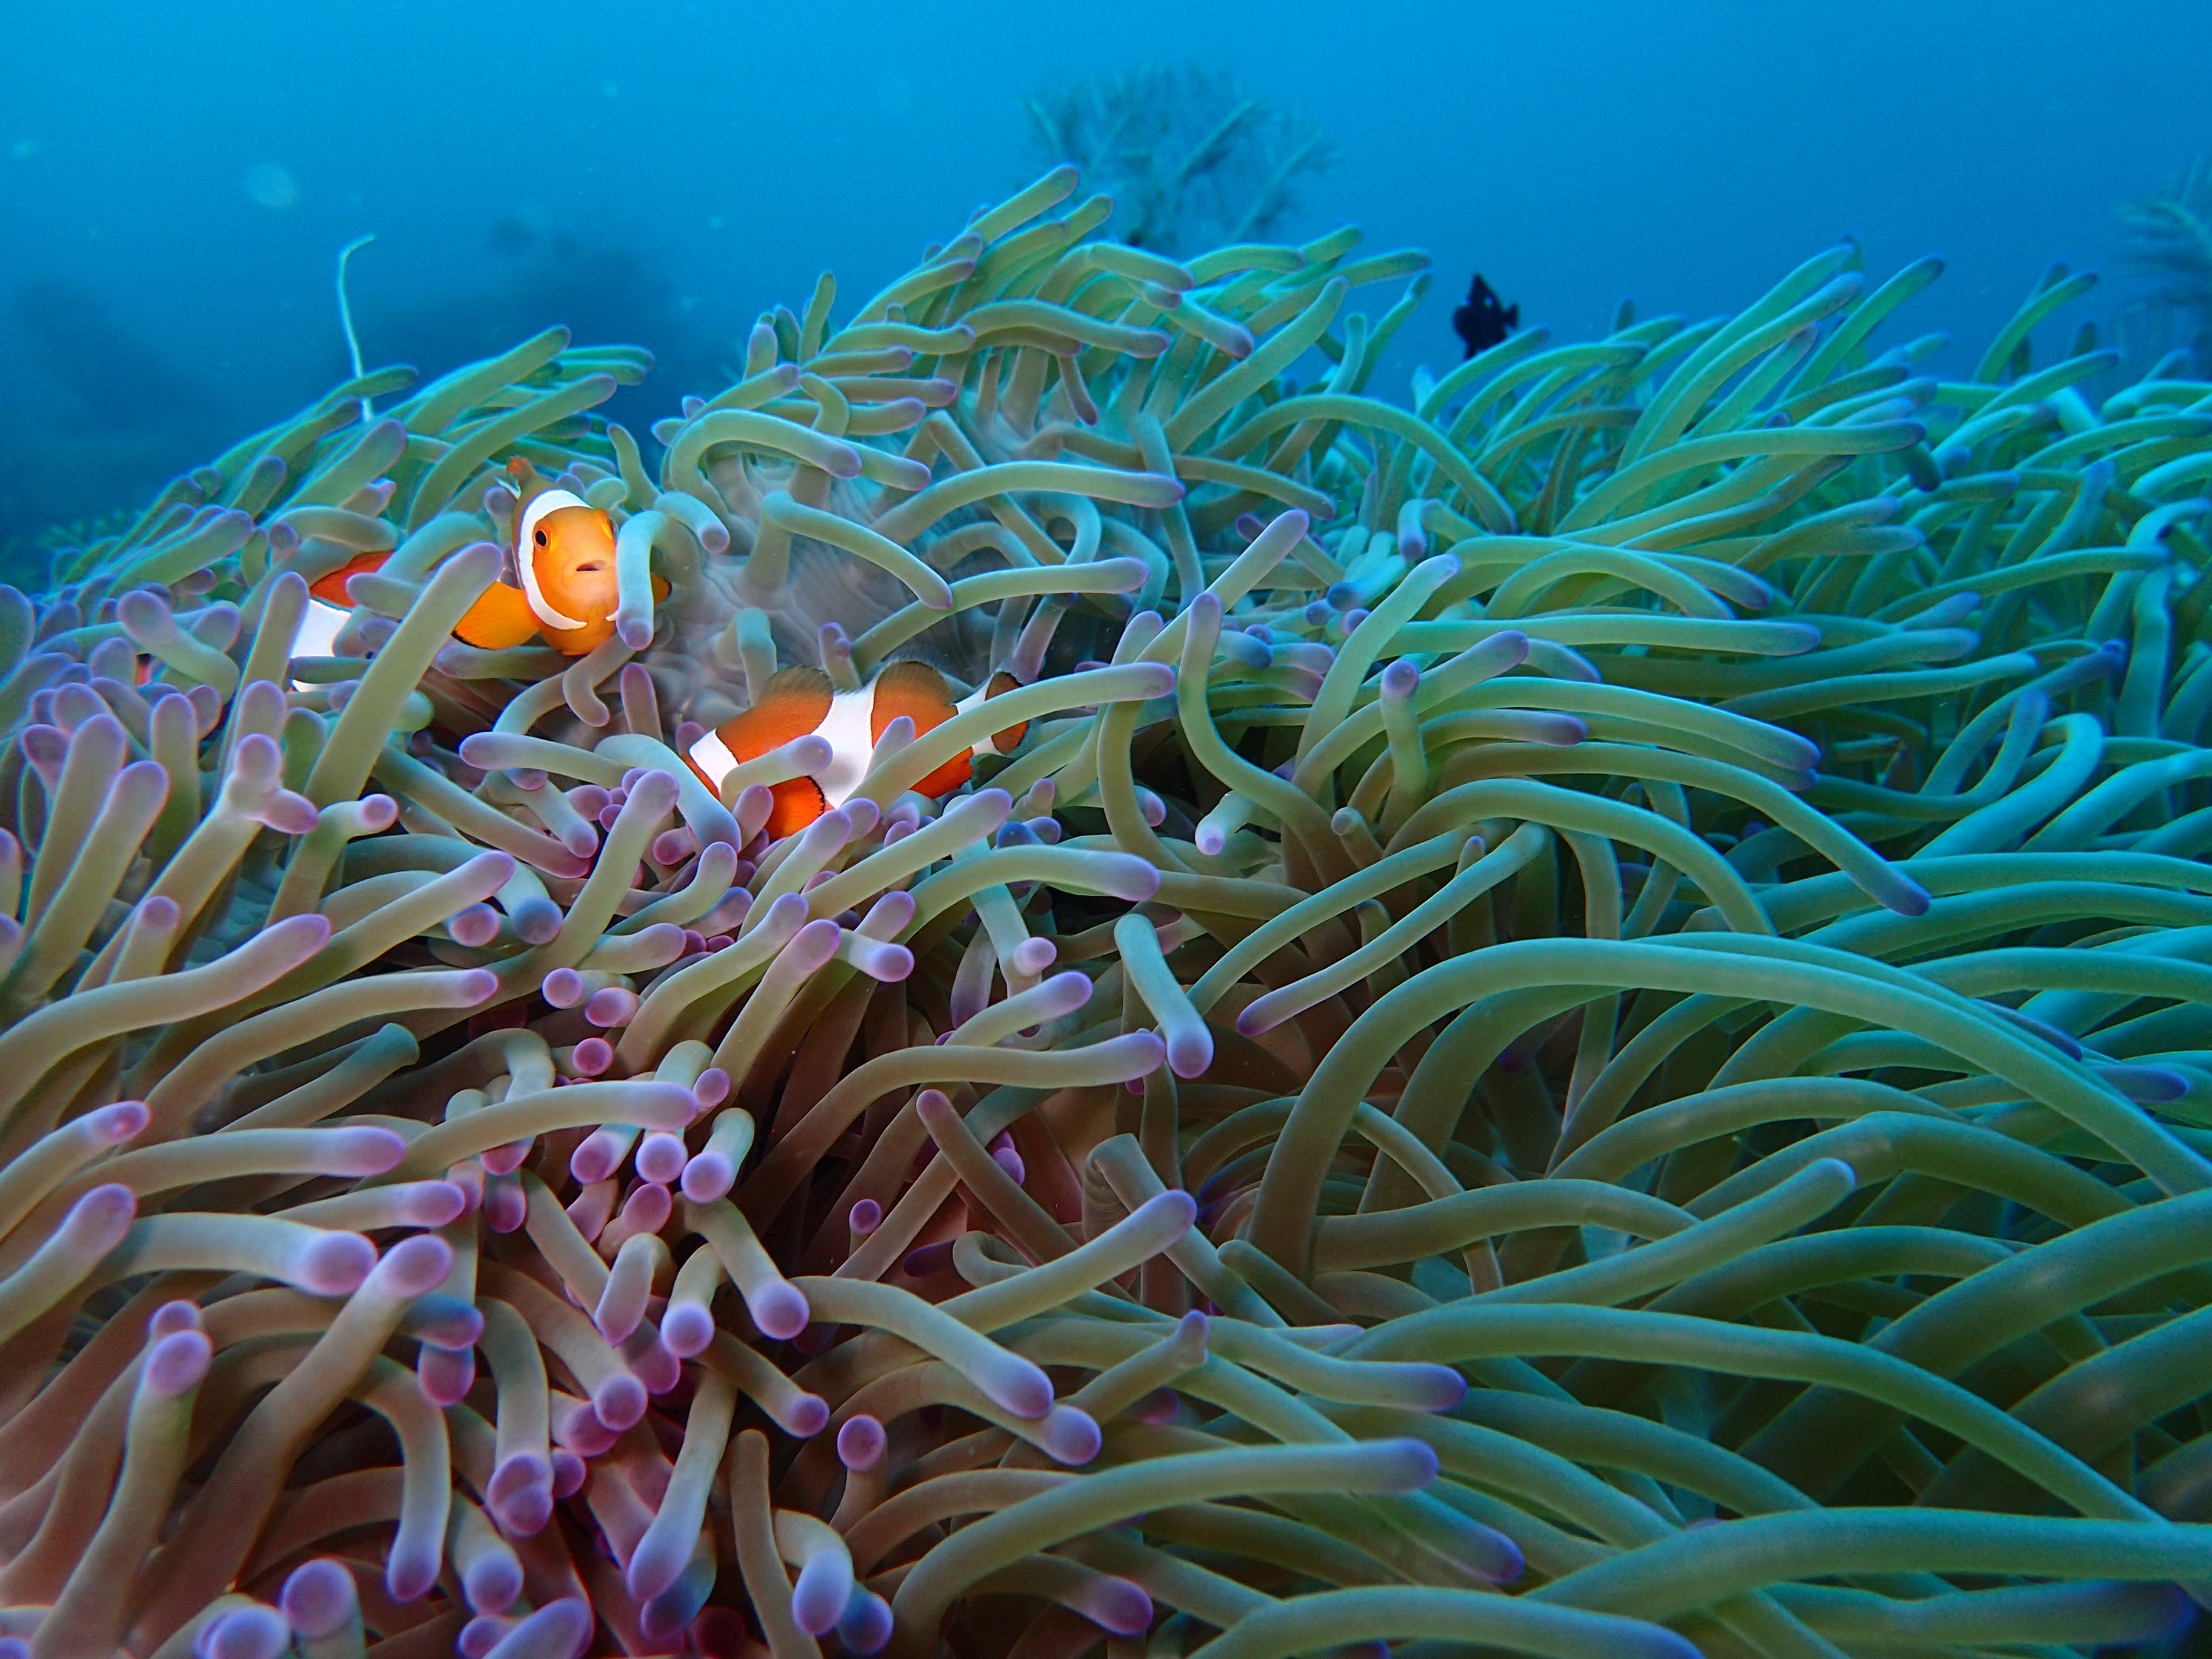 Family of clownfish in a sea anemone 